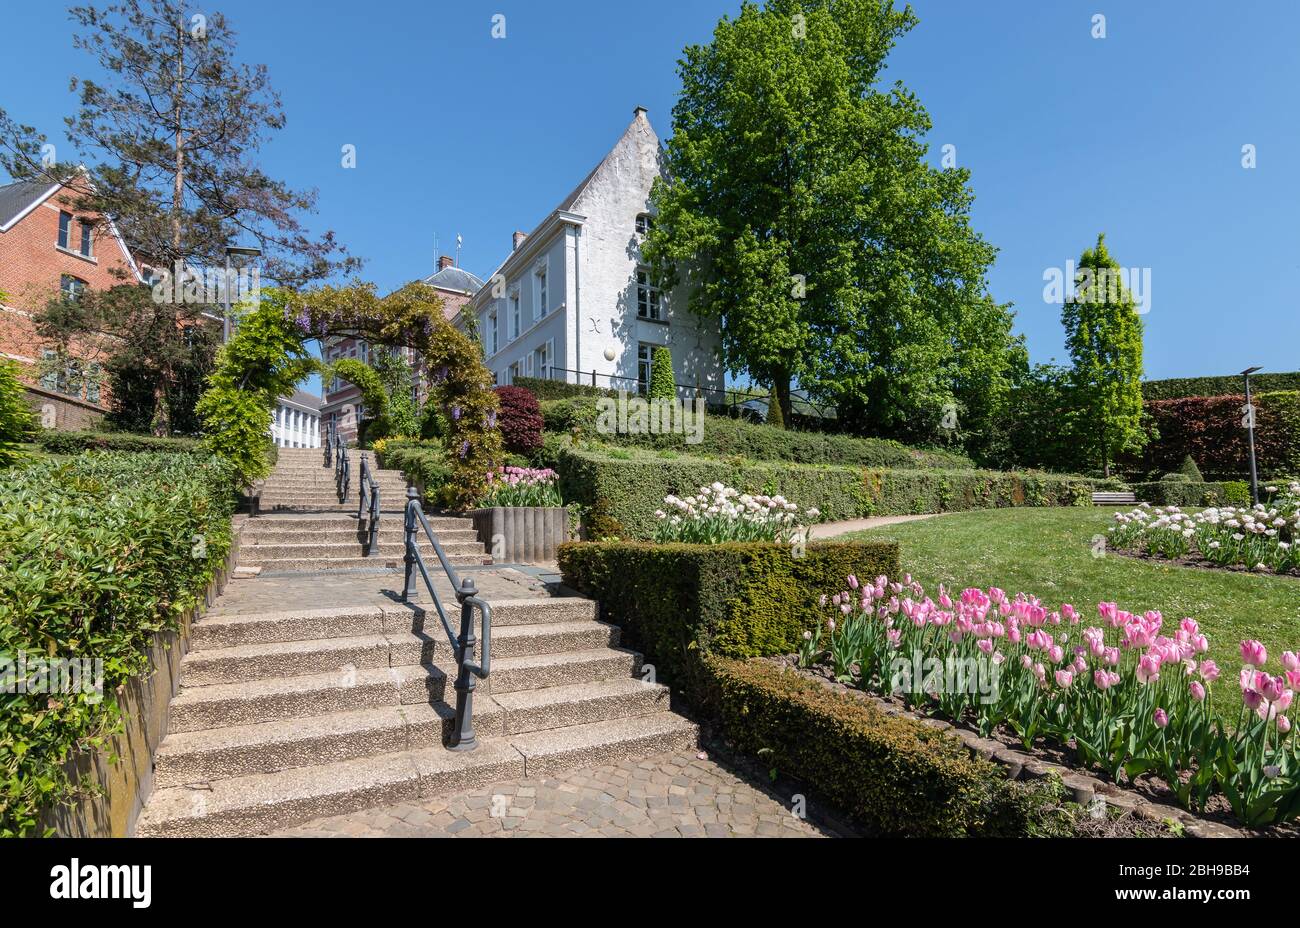 Public park with stairs and a beautiful landscaped spring garden. Stock Photo